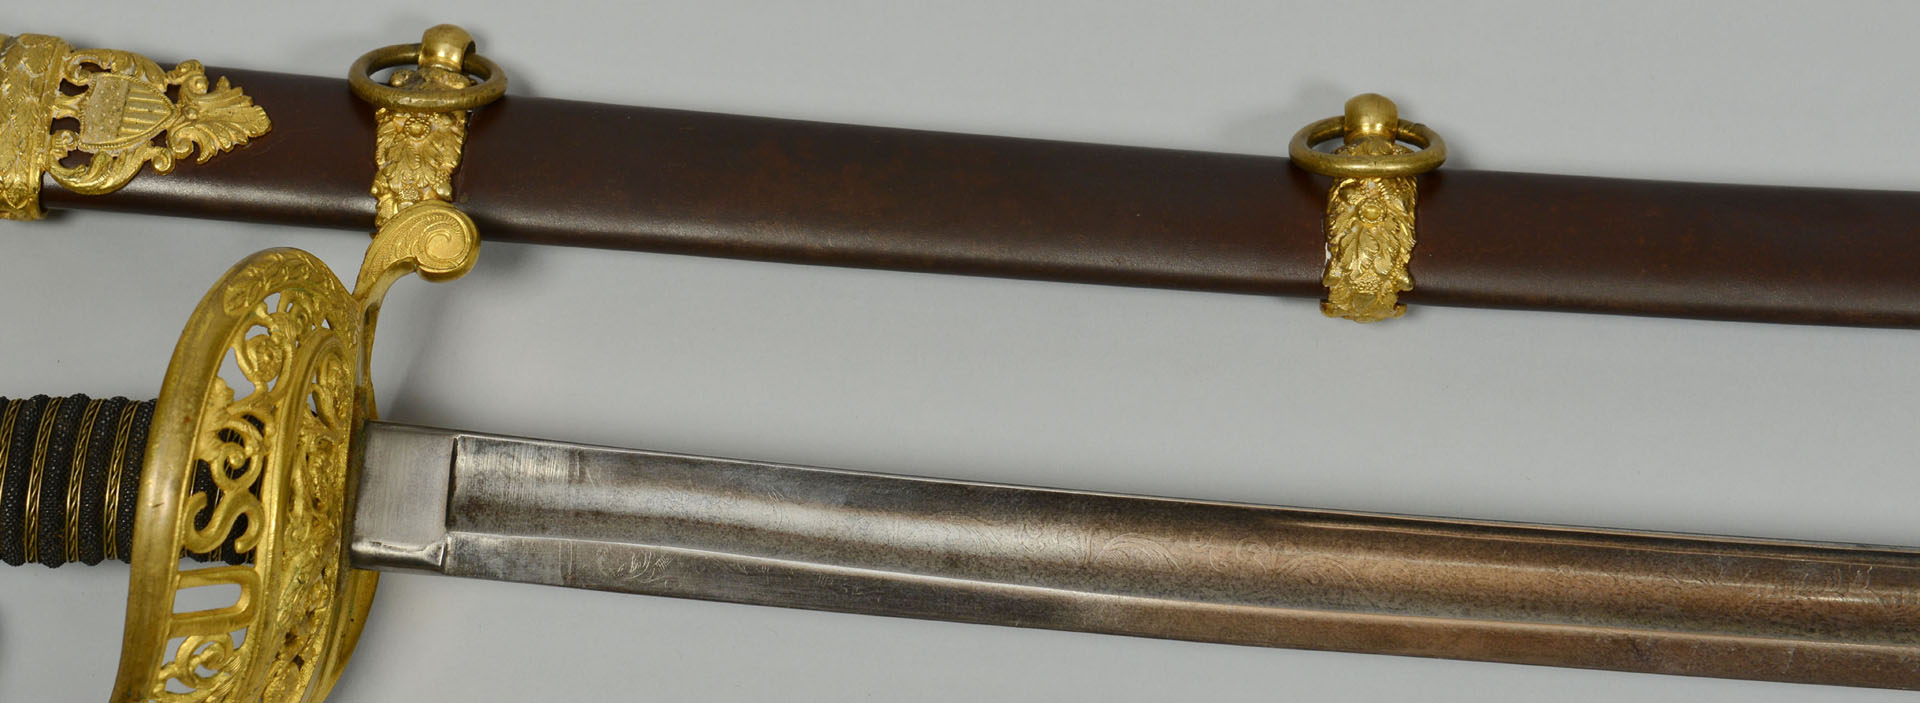 Lot 84: Ames M1850 Staff and Field Officers Sword